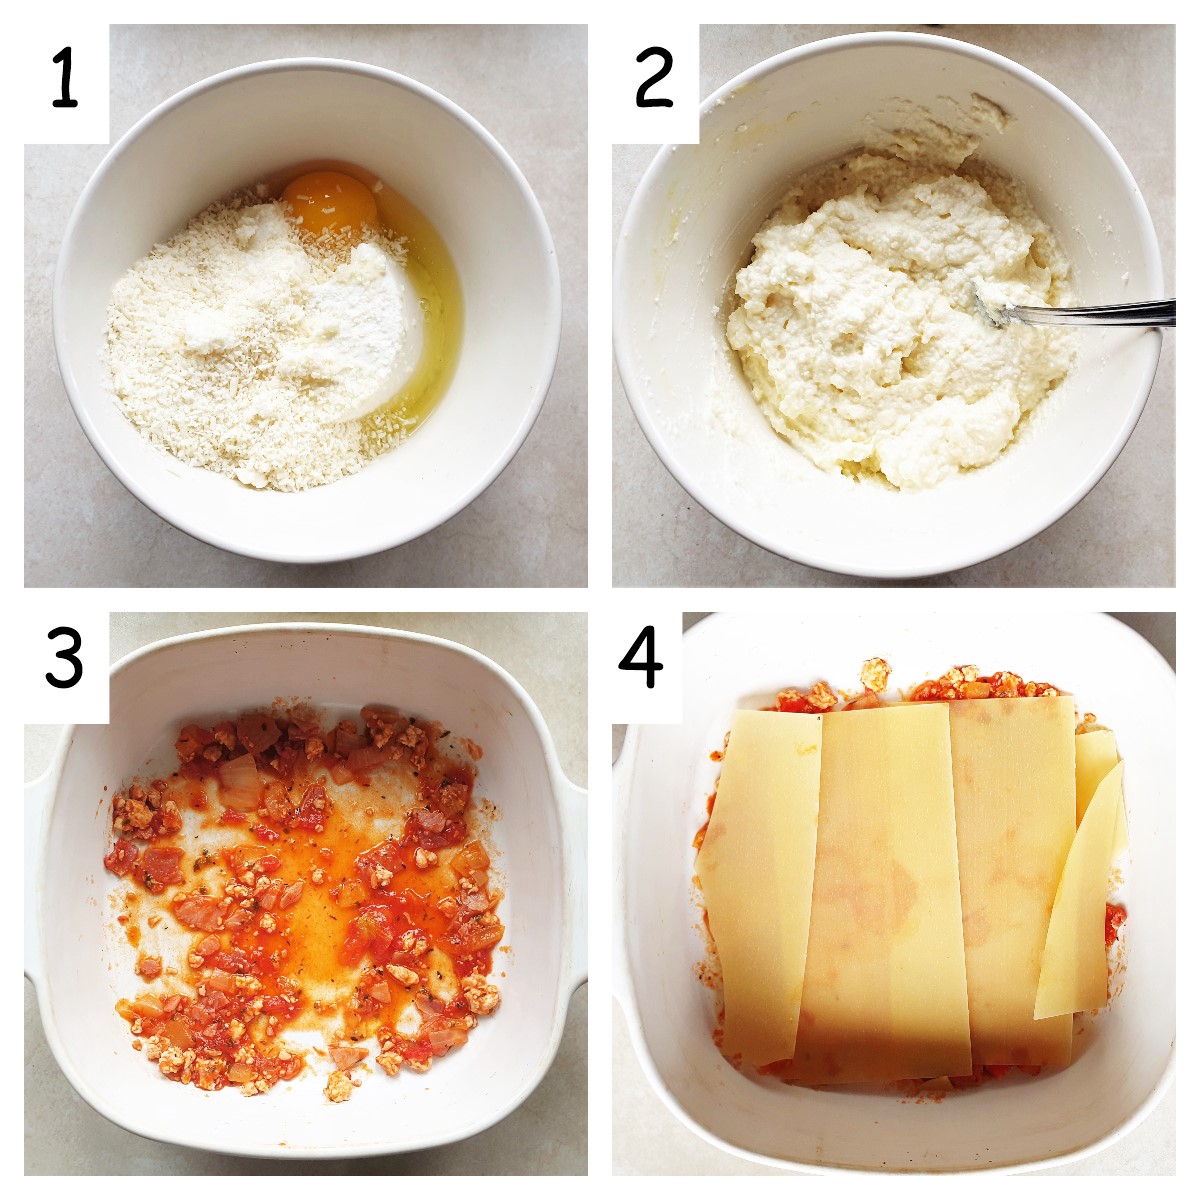 A collage of 4 images showing how to mix cheese spread and place first layer of lasagne in a dish.